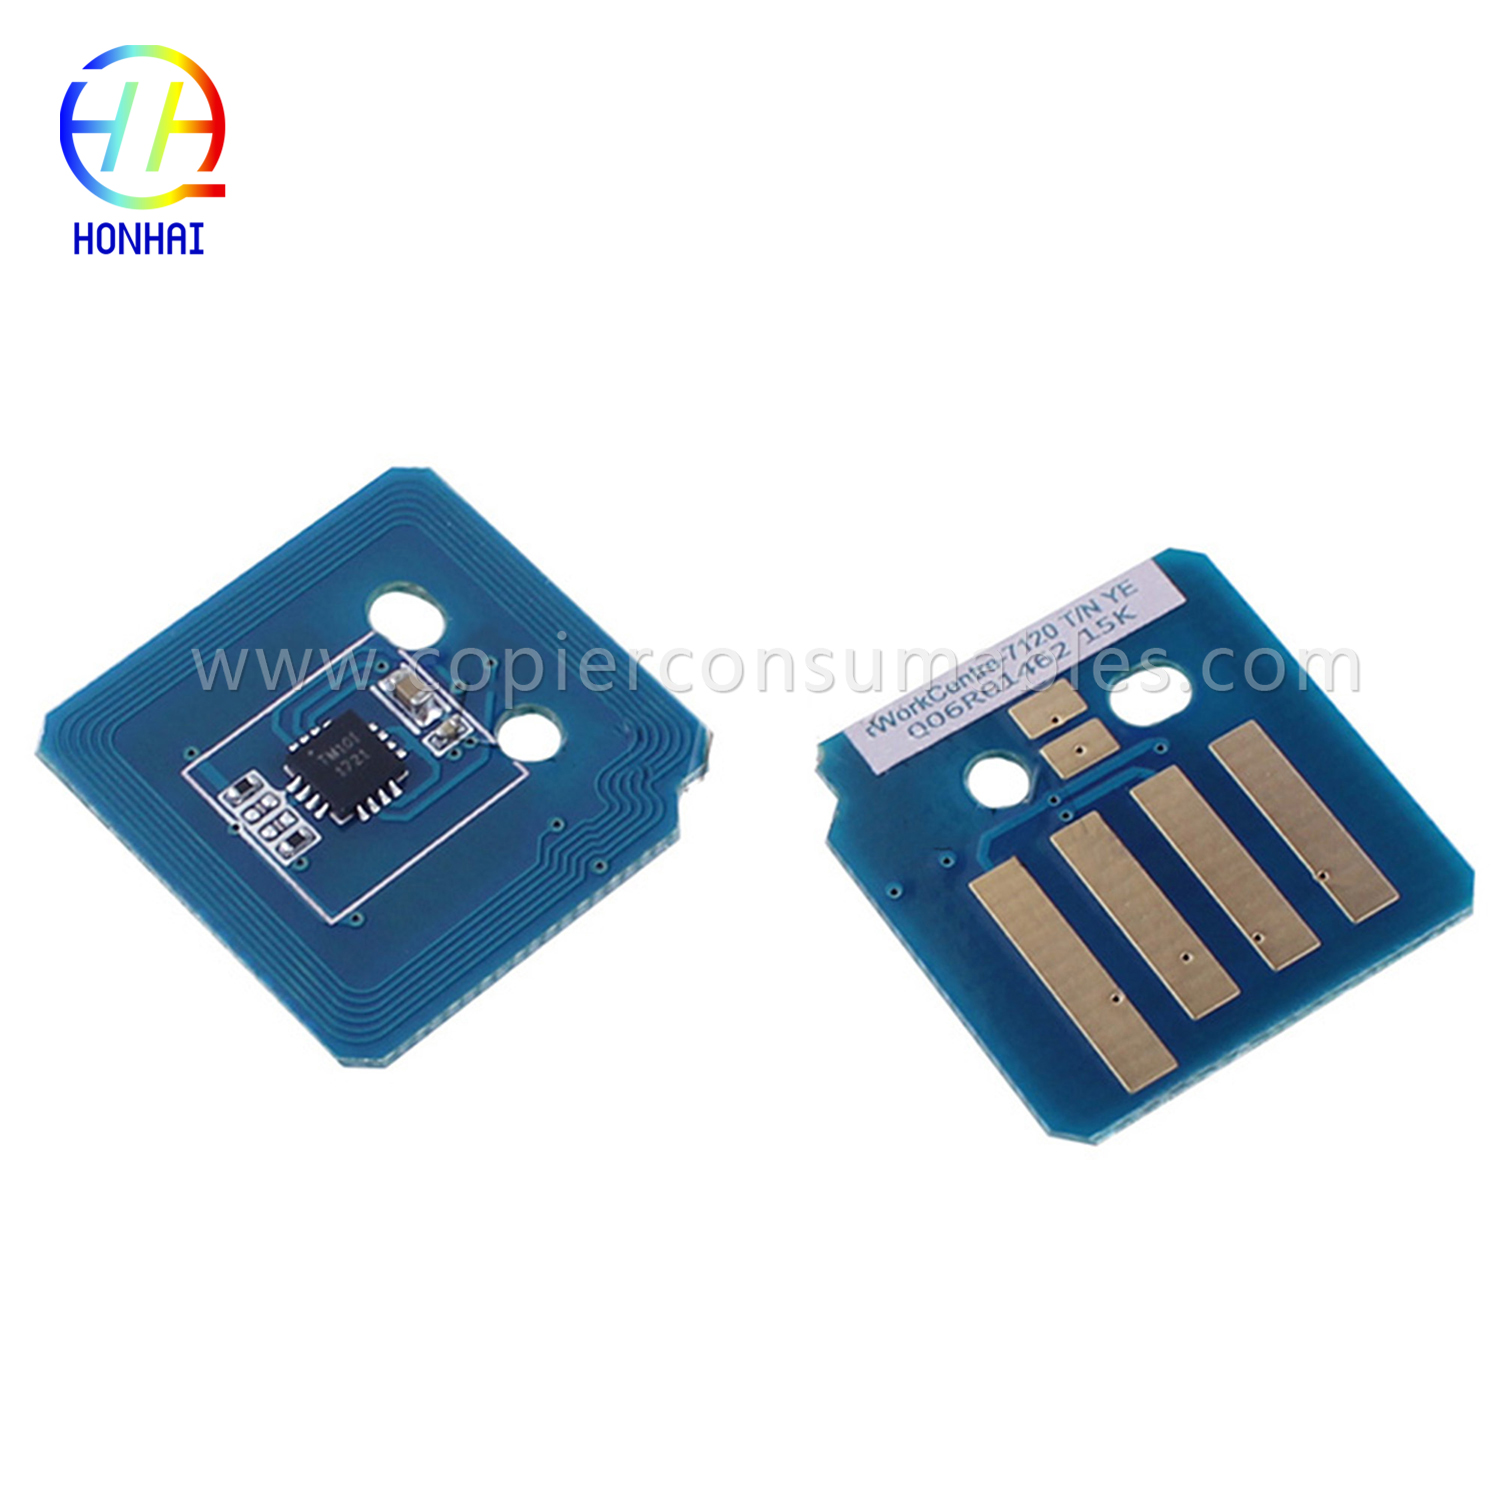 Toner Chip for Xerox Workcentre 7120 7125 7220 7225 (006R01461 006R01462 006R01463 006R01464) (2) 拷贝